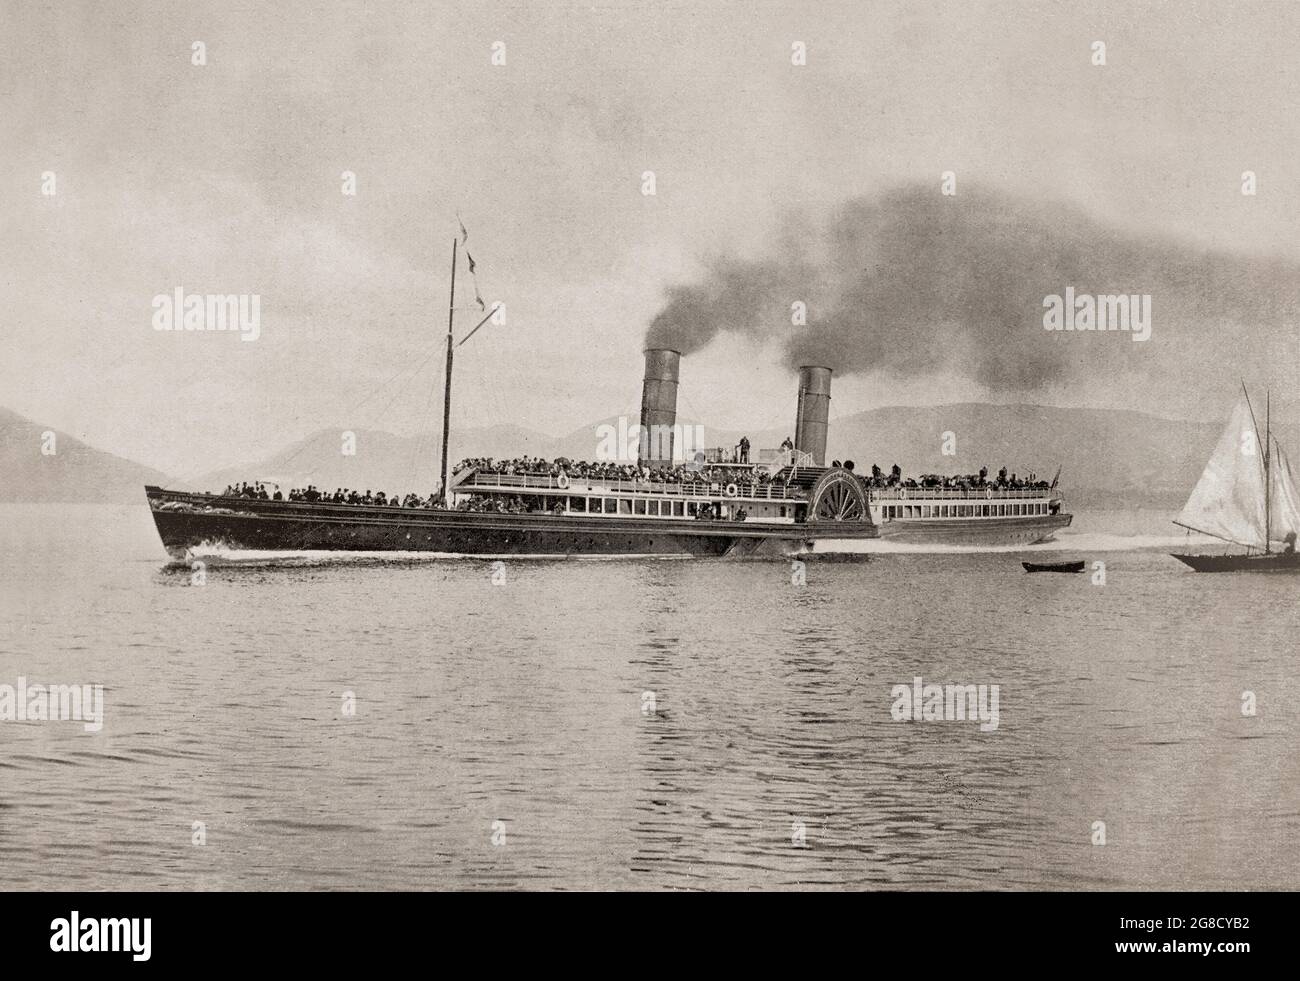 A late 19th century view of RMS Columba, a Clyde paddle steamer, that ran the first leg of "The Royal Route" to Ardrishaig calling at Rothesay and the Kyles of Bute for fifty eight summers. She was built by J & G Thomson of Clydebank, and was the flagship of the MacBrayne fleet from 1879 to 1935 and often considered the finest Clyde steamer of all time. Stock Photo